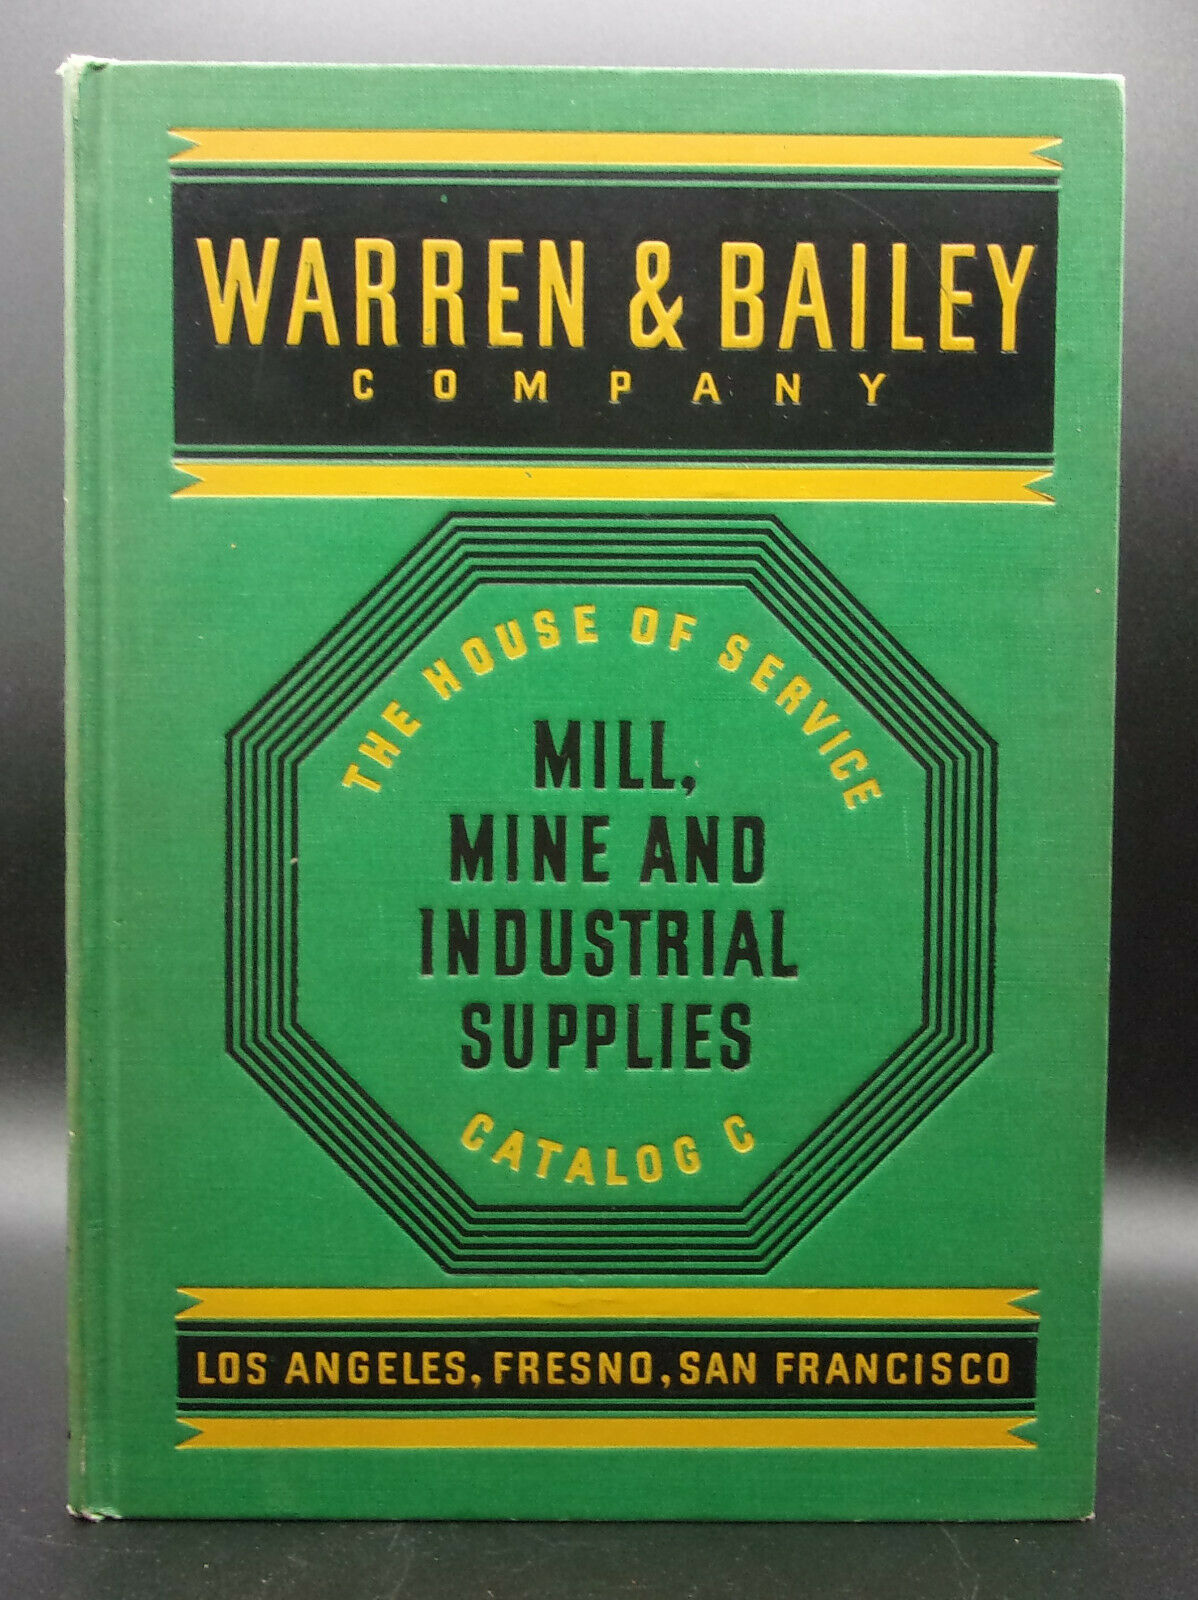 Primary image for Warren & Bailey Catalog C Mill, Mine & Industrial Supplies 1937 Hardcover Tools